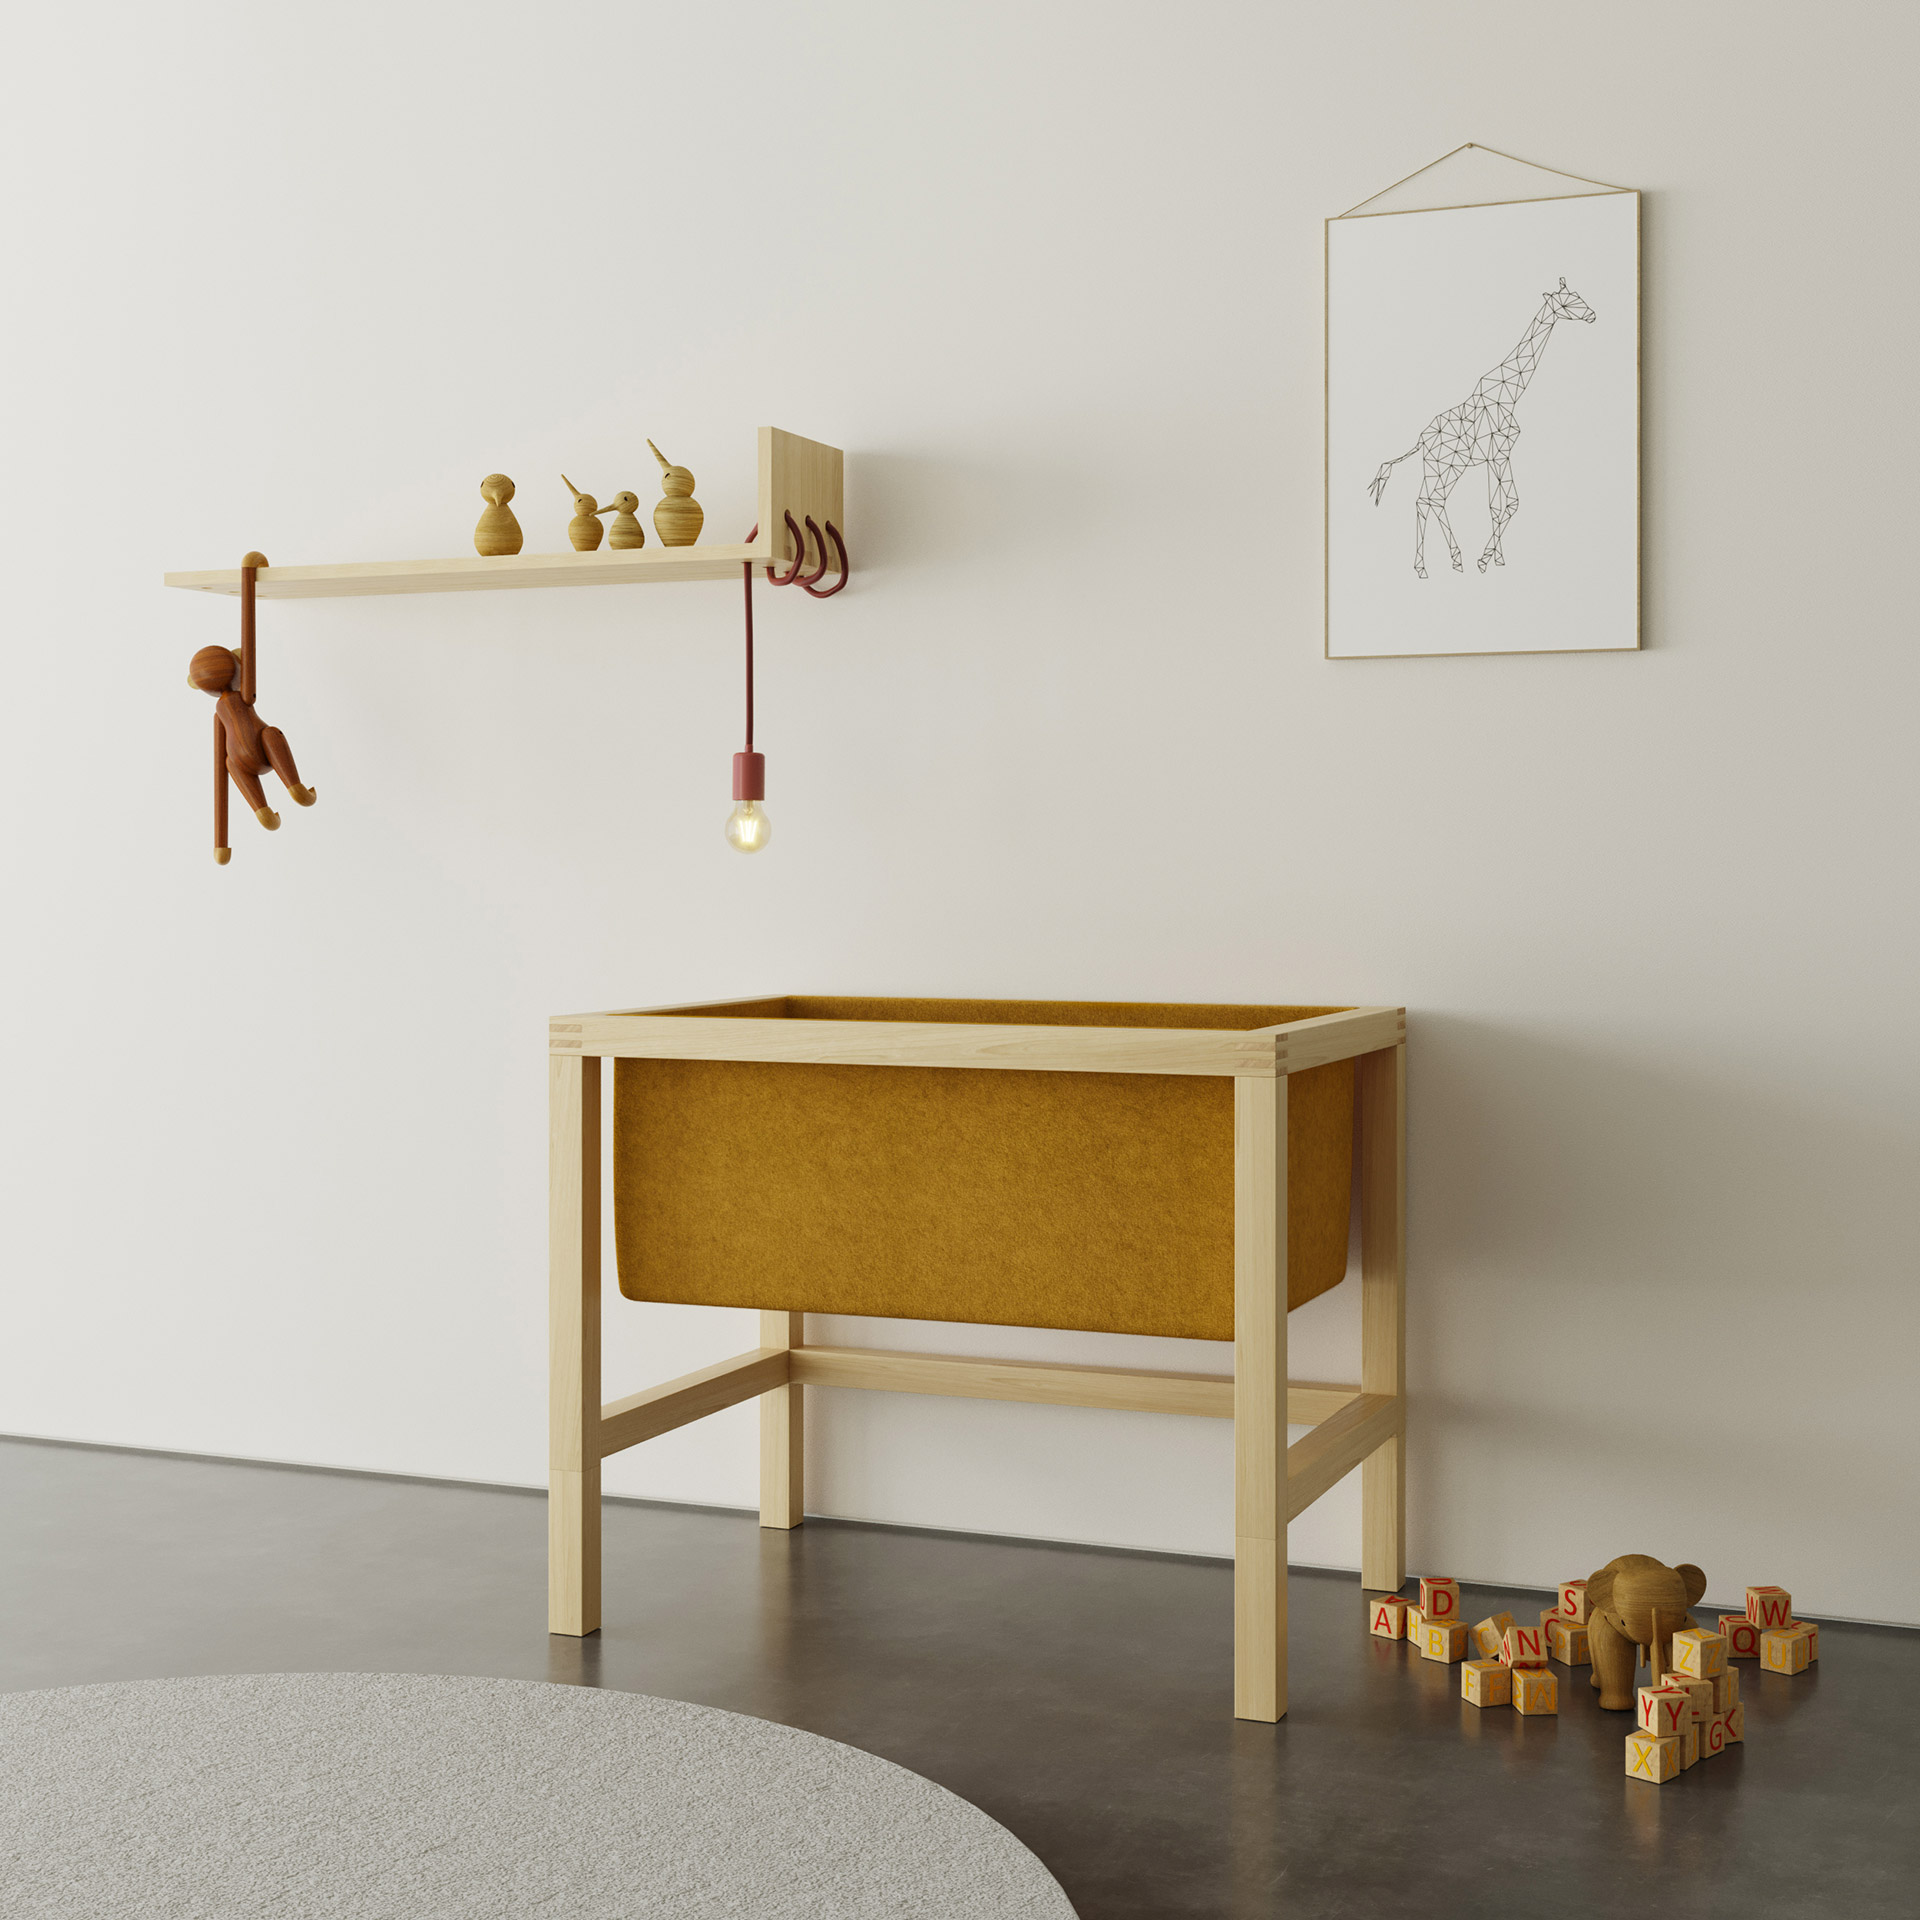 BABY CRADLE NINA is made from durable and solid wood